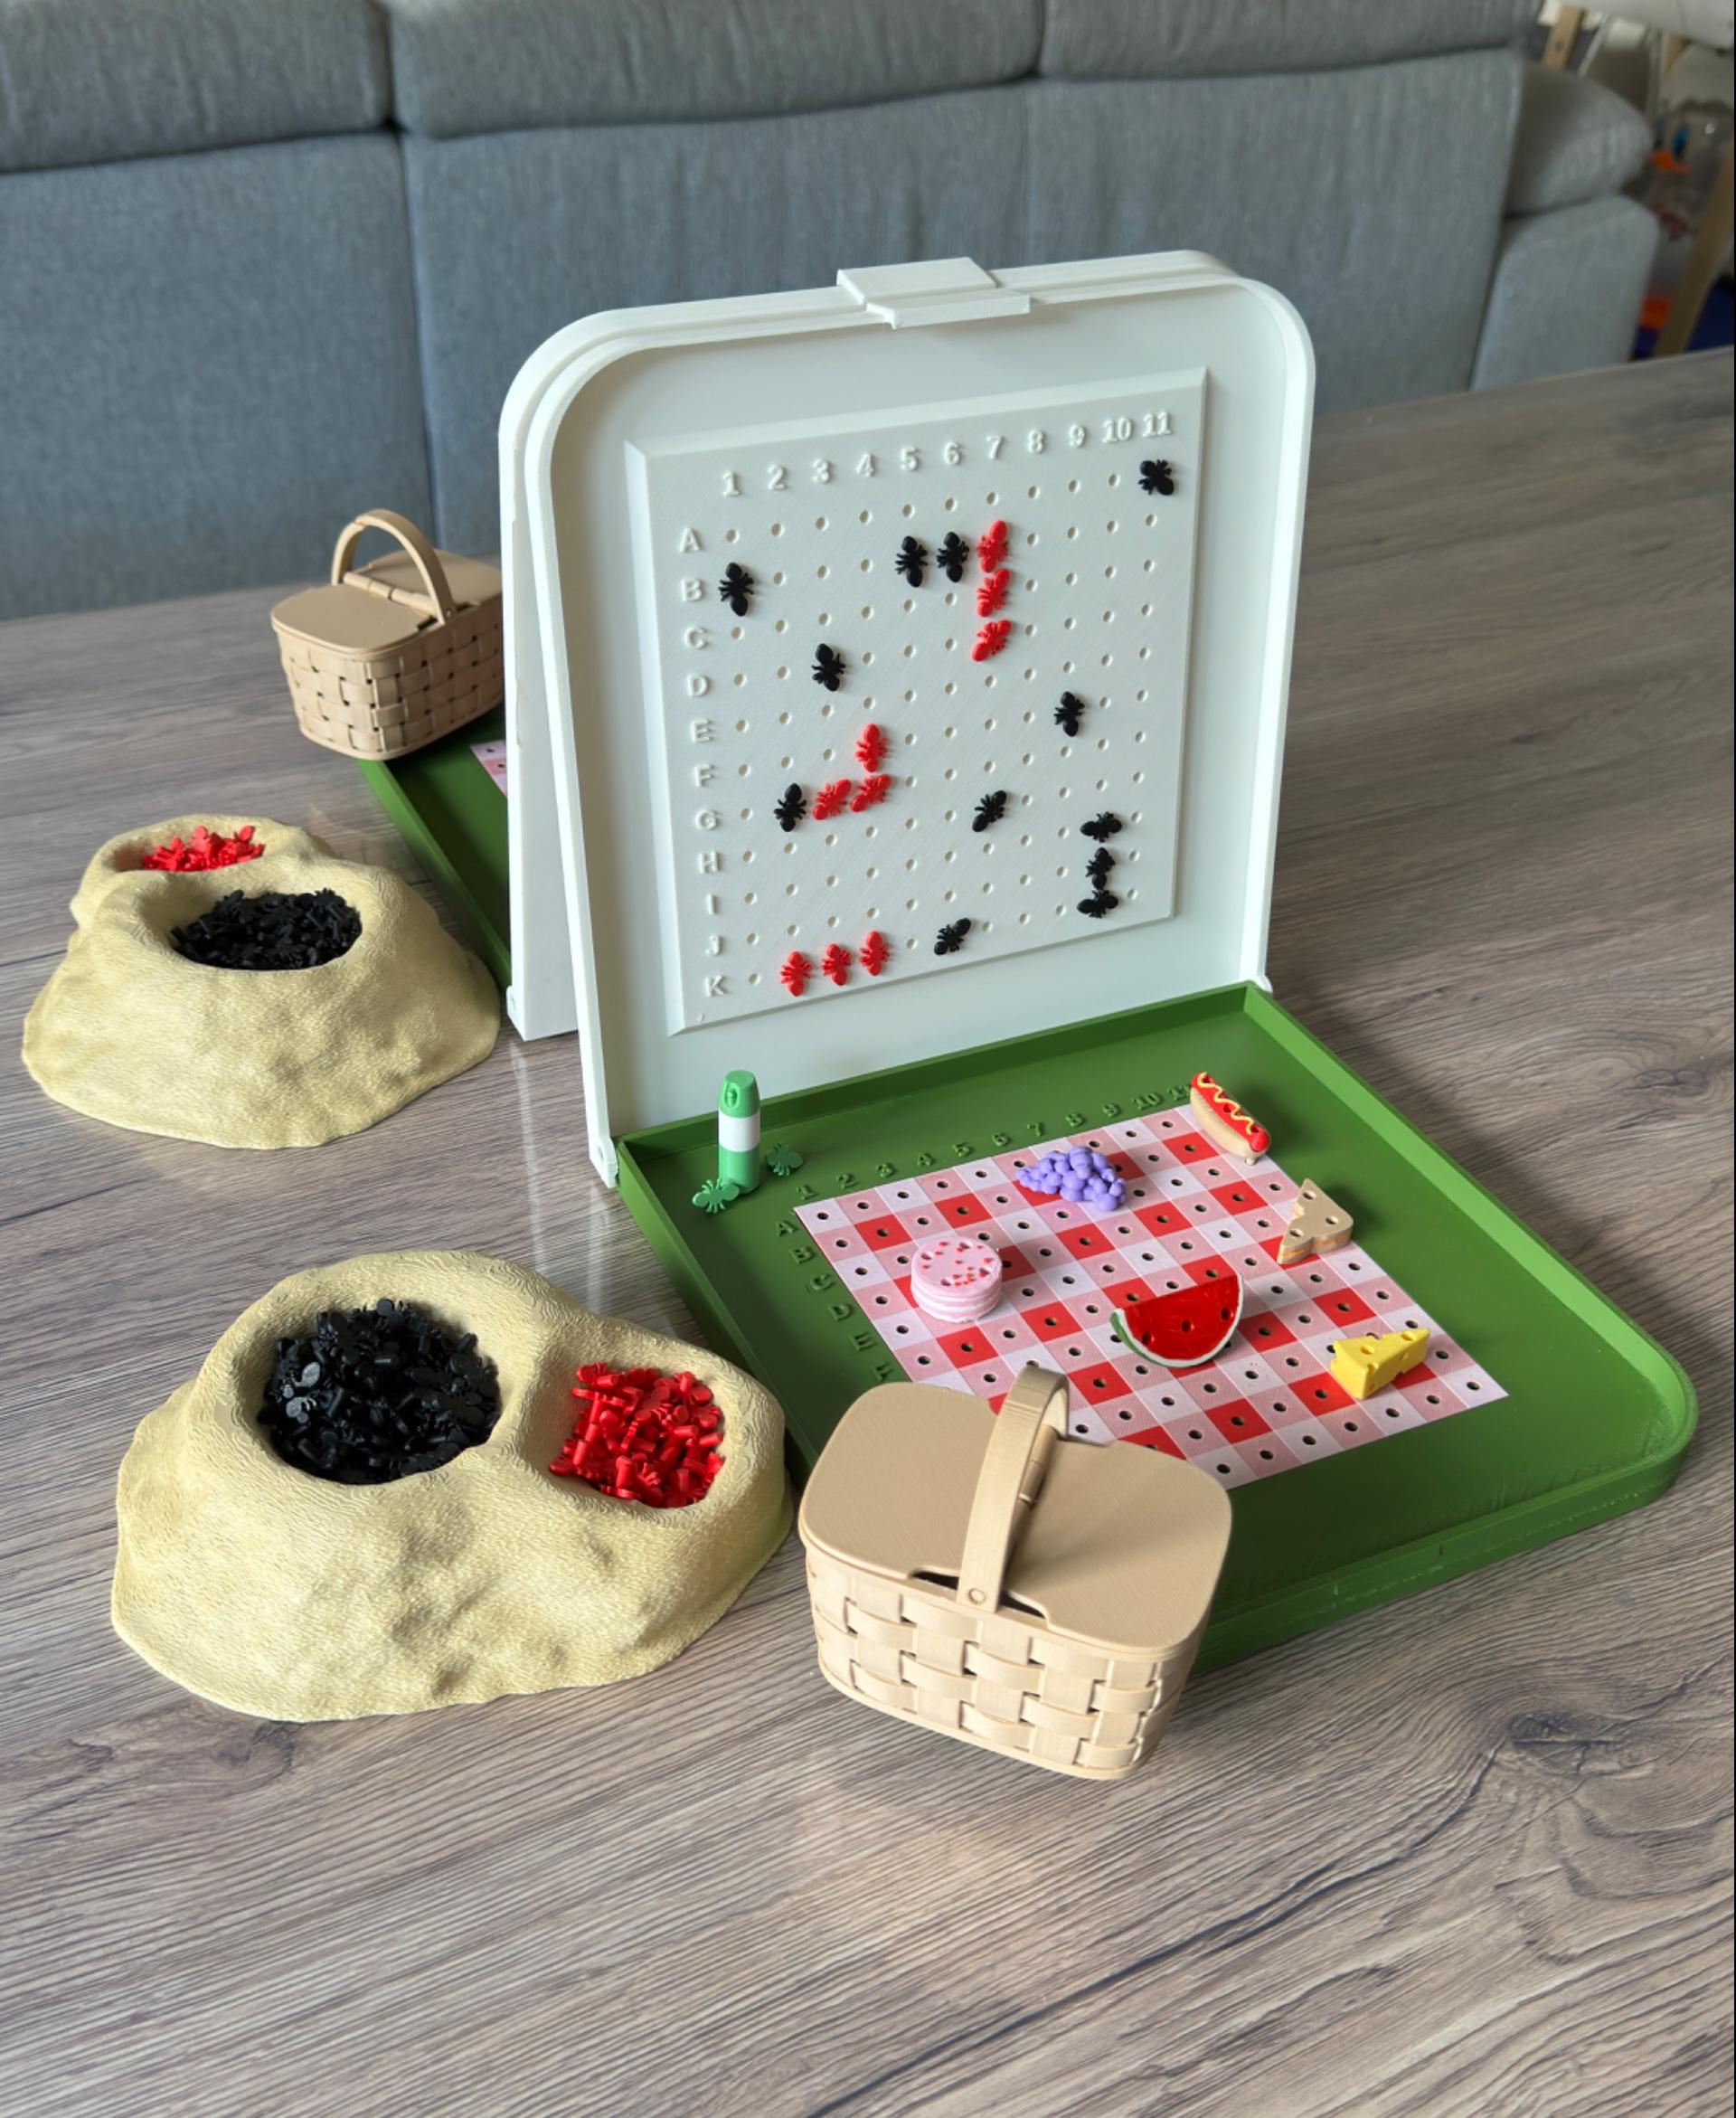 Snack Attack Board Game - Snack attack pic nic game with ants fully 3D printed 🤗 - 3d model